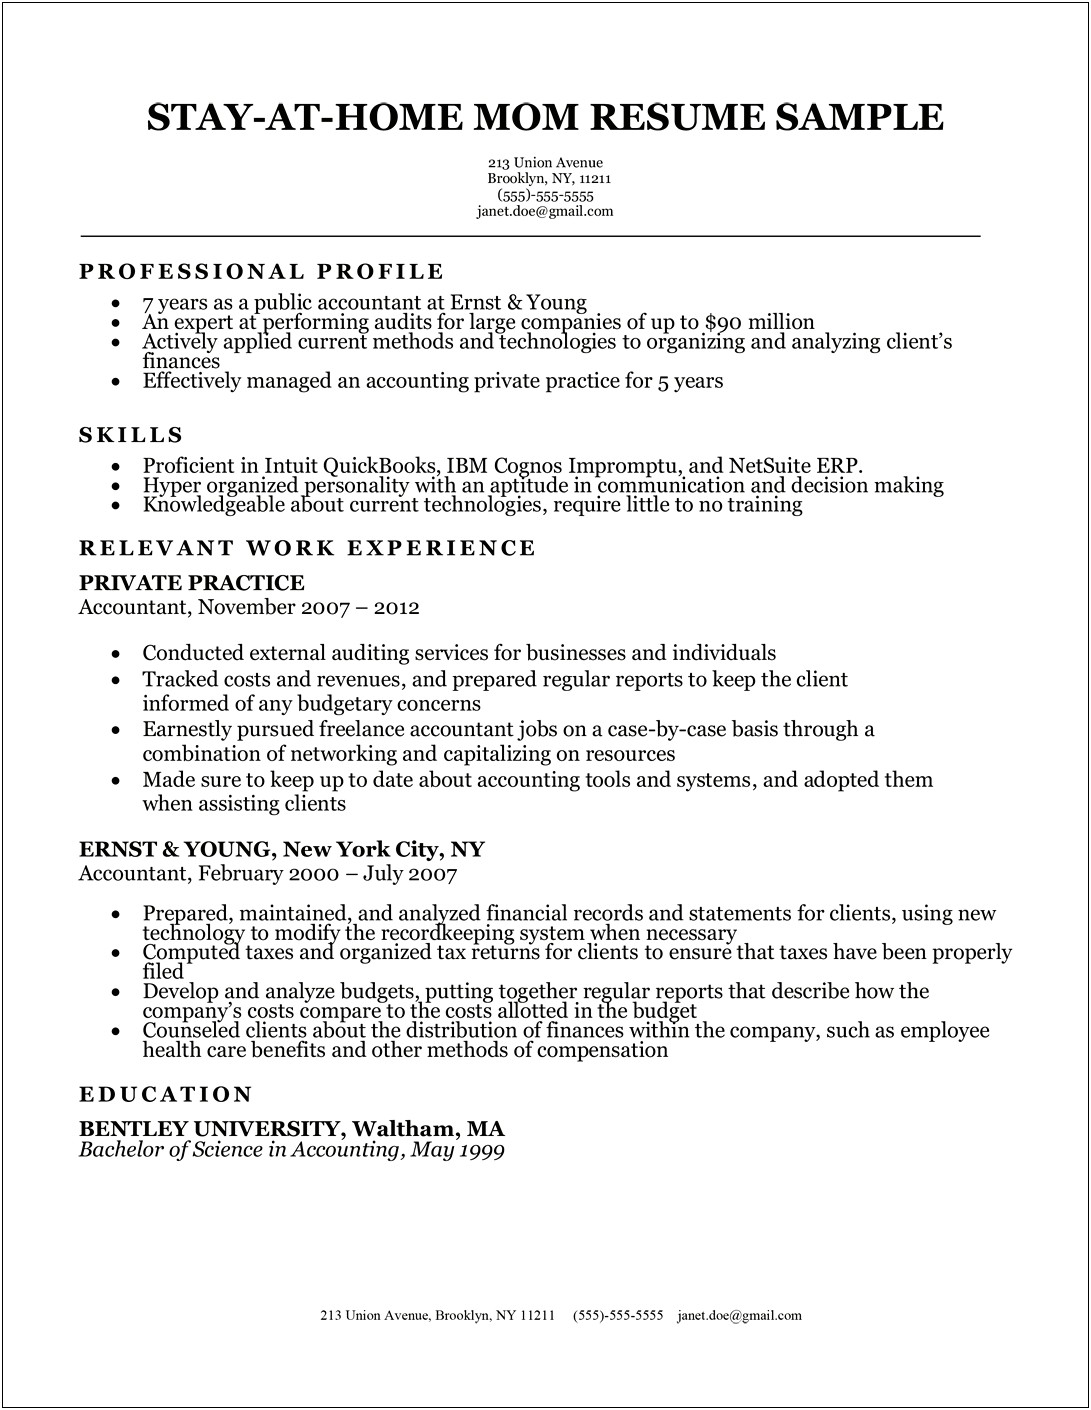 Resume Objective For Looking To Work From Home